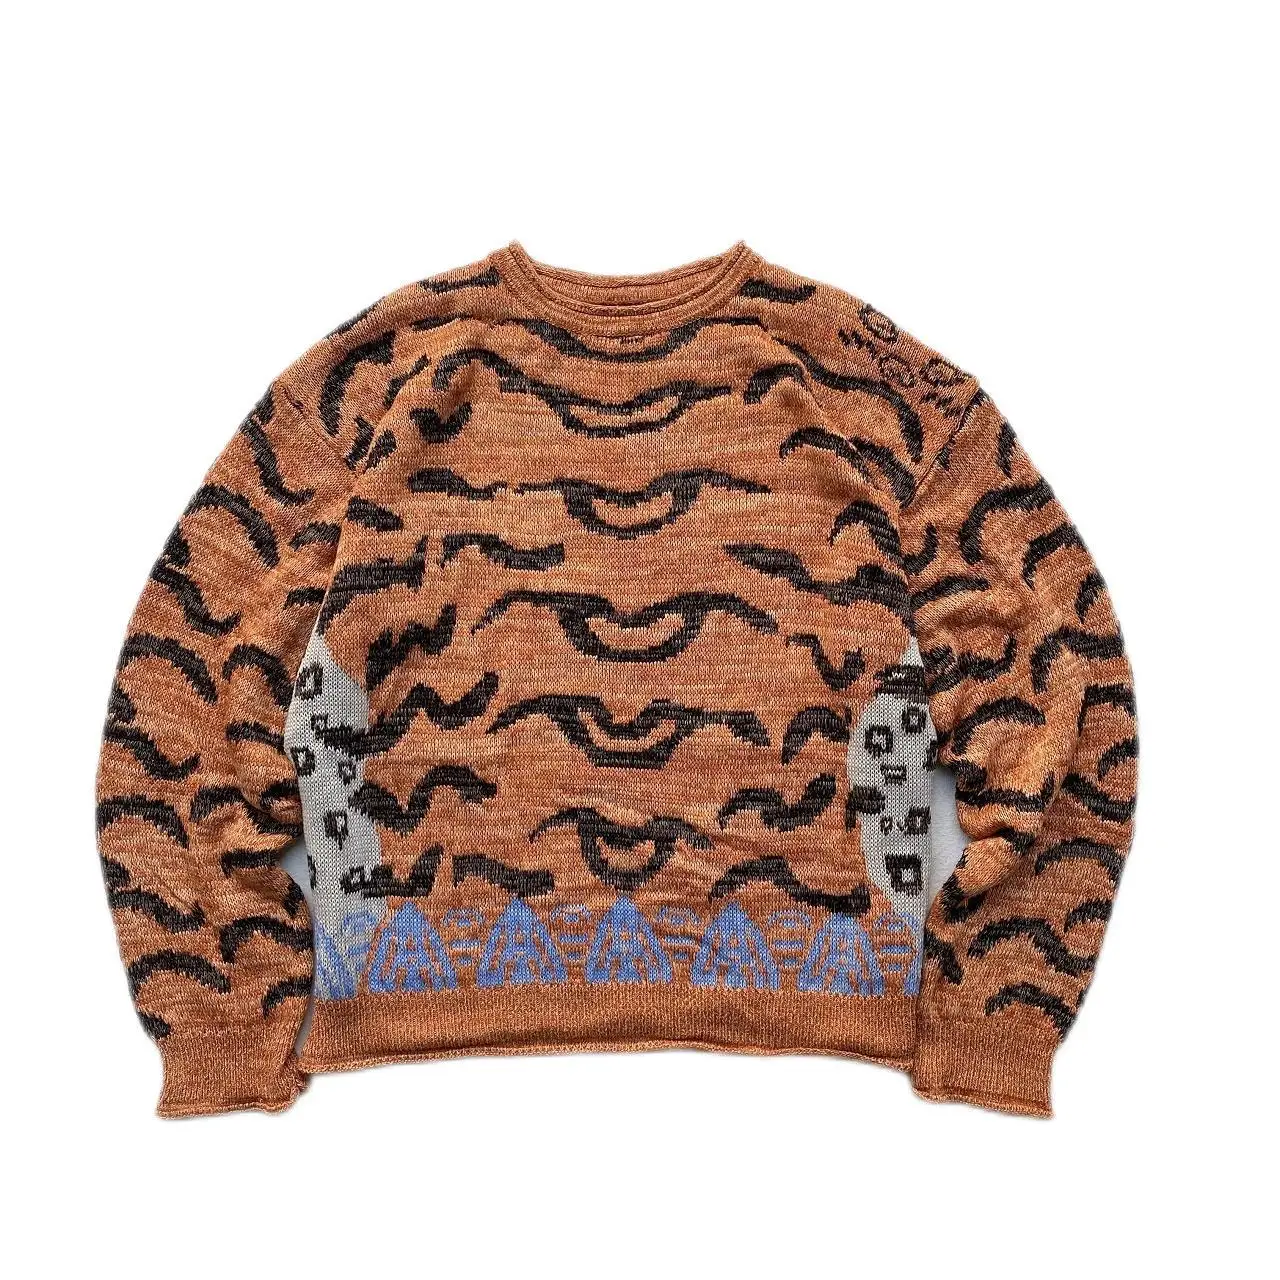 Kapital Vintage Tiger Printed Fashion Japan Style Round Neck Knitted Sweater Men's and Women's Loose Long Sleeve Pullover